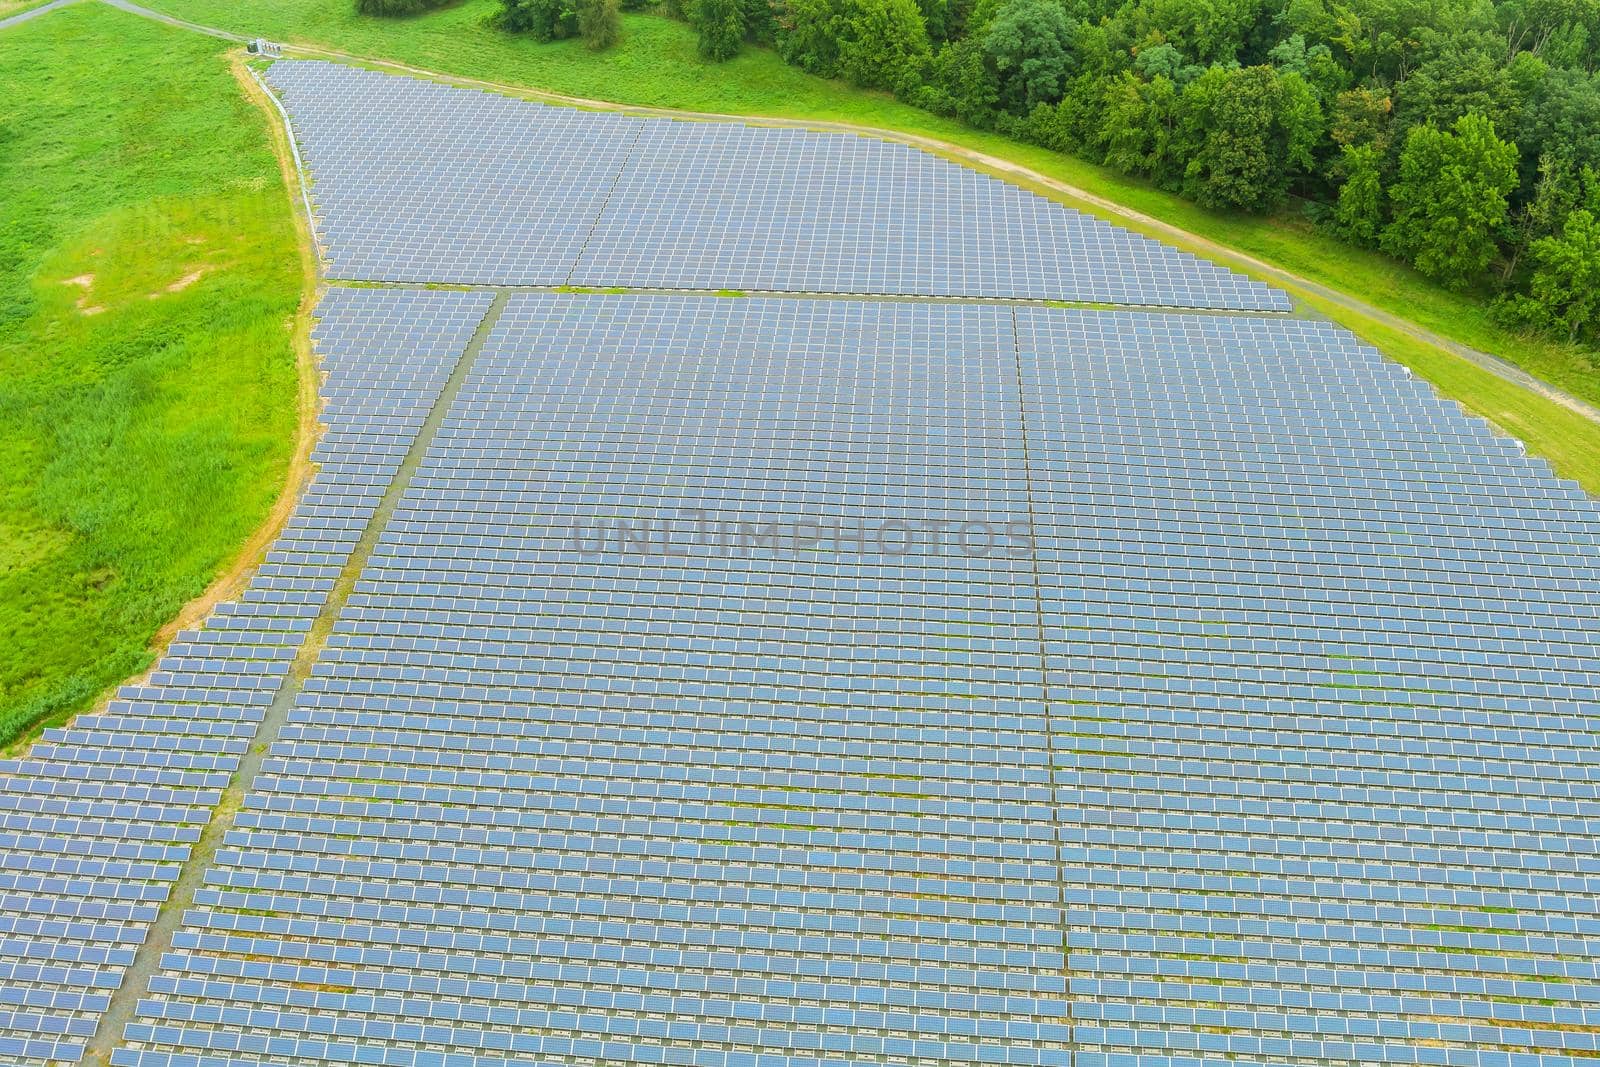 Aerial view of solar panels with renewable alternative green energy